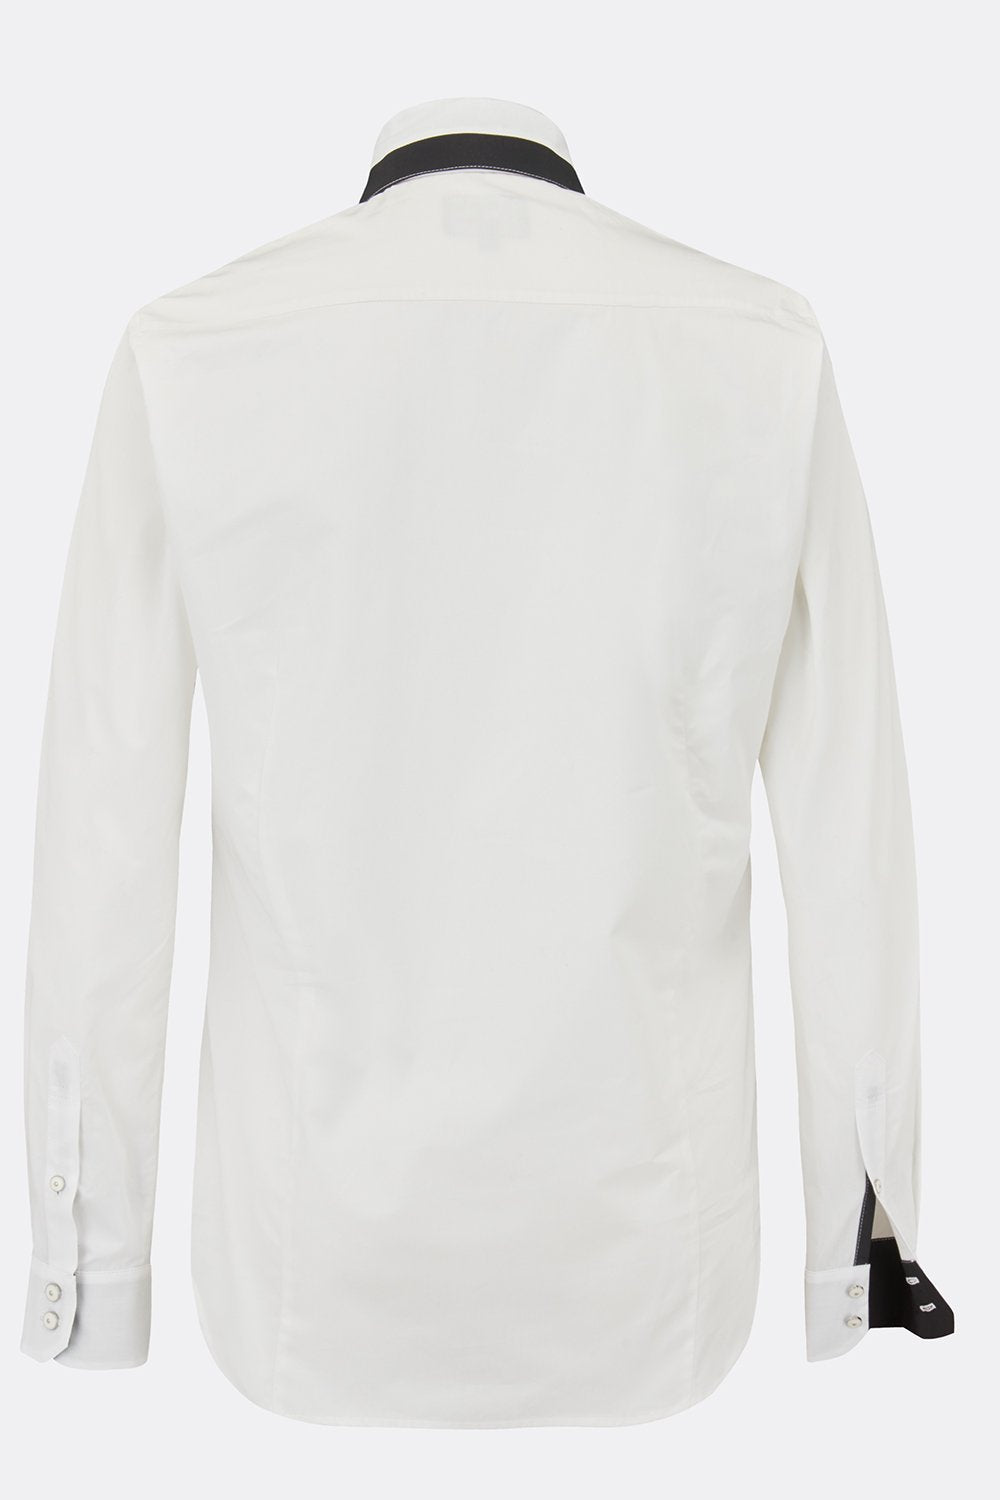 FLOYD SHIRT IN WHITE-menswear-A Child Of The Jago